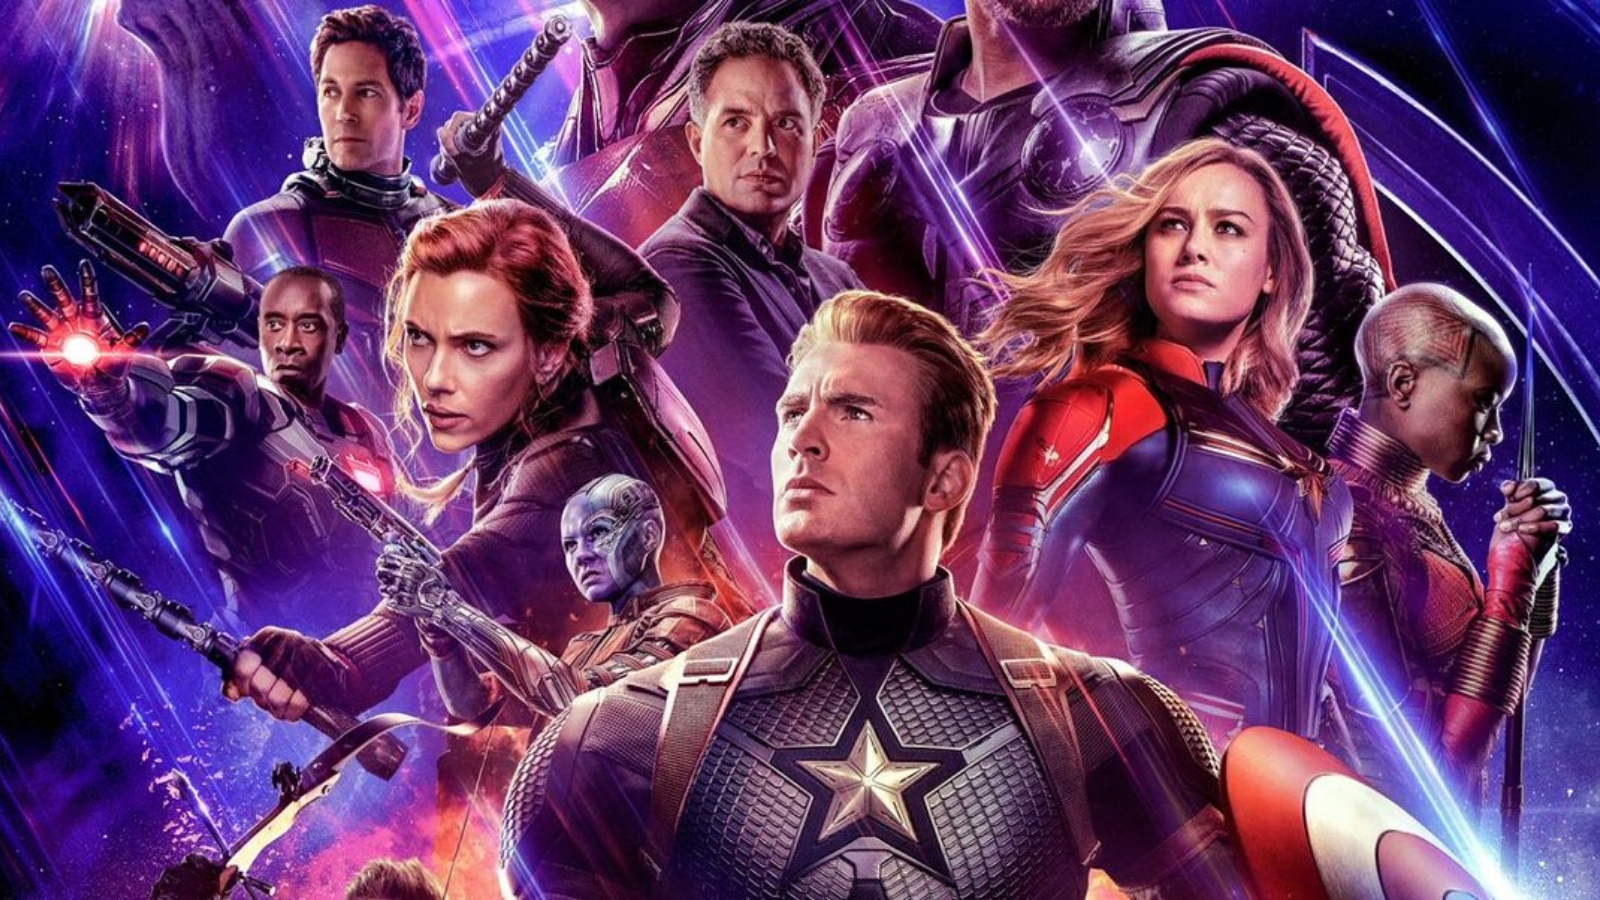 Colourful poster for Avengers: Endgame with all of the characters featured